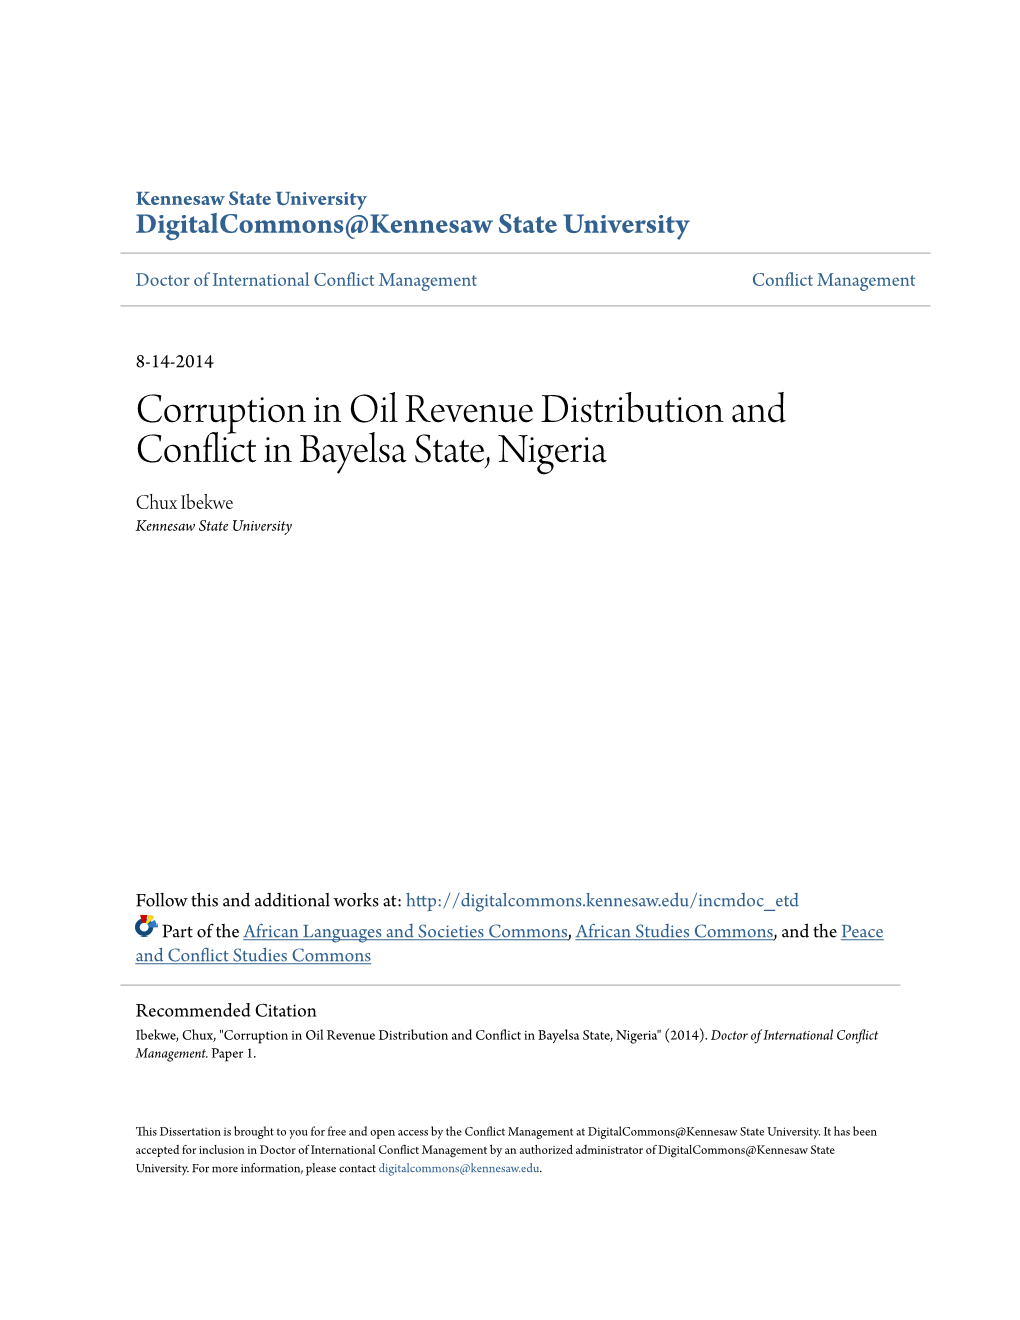 Corruption in Oil Revenue Distribution and Conflict in Bayelsa State, Nigeria Chux Ibekwe Kennesaw State University